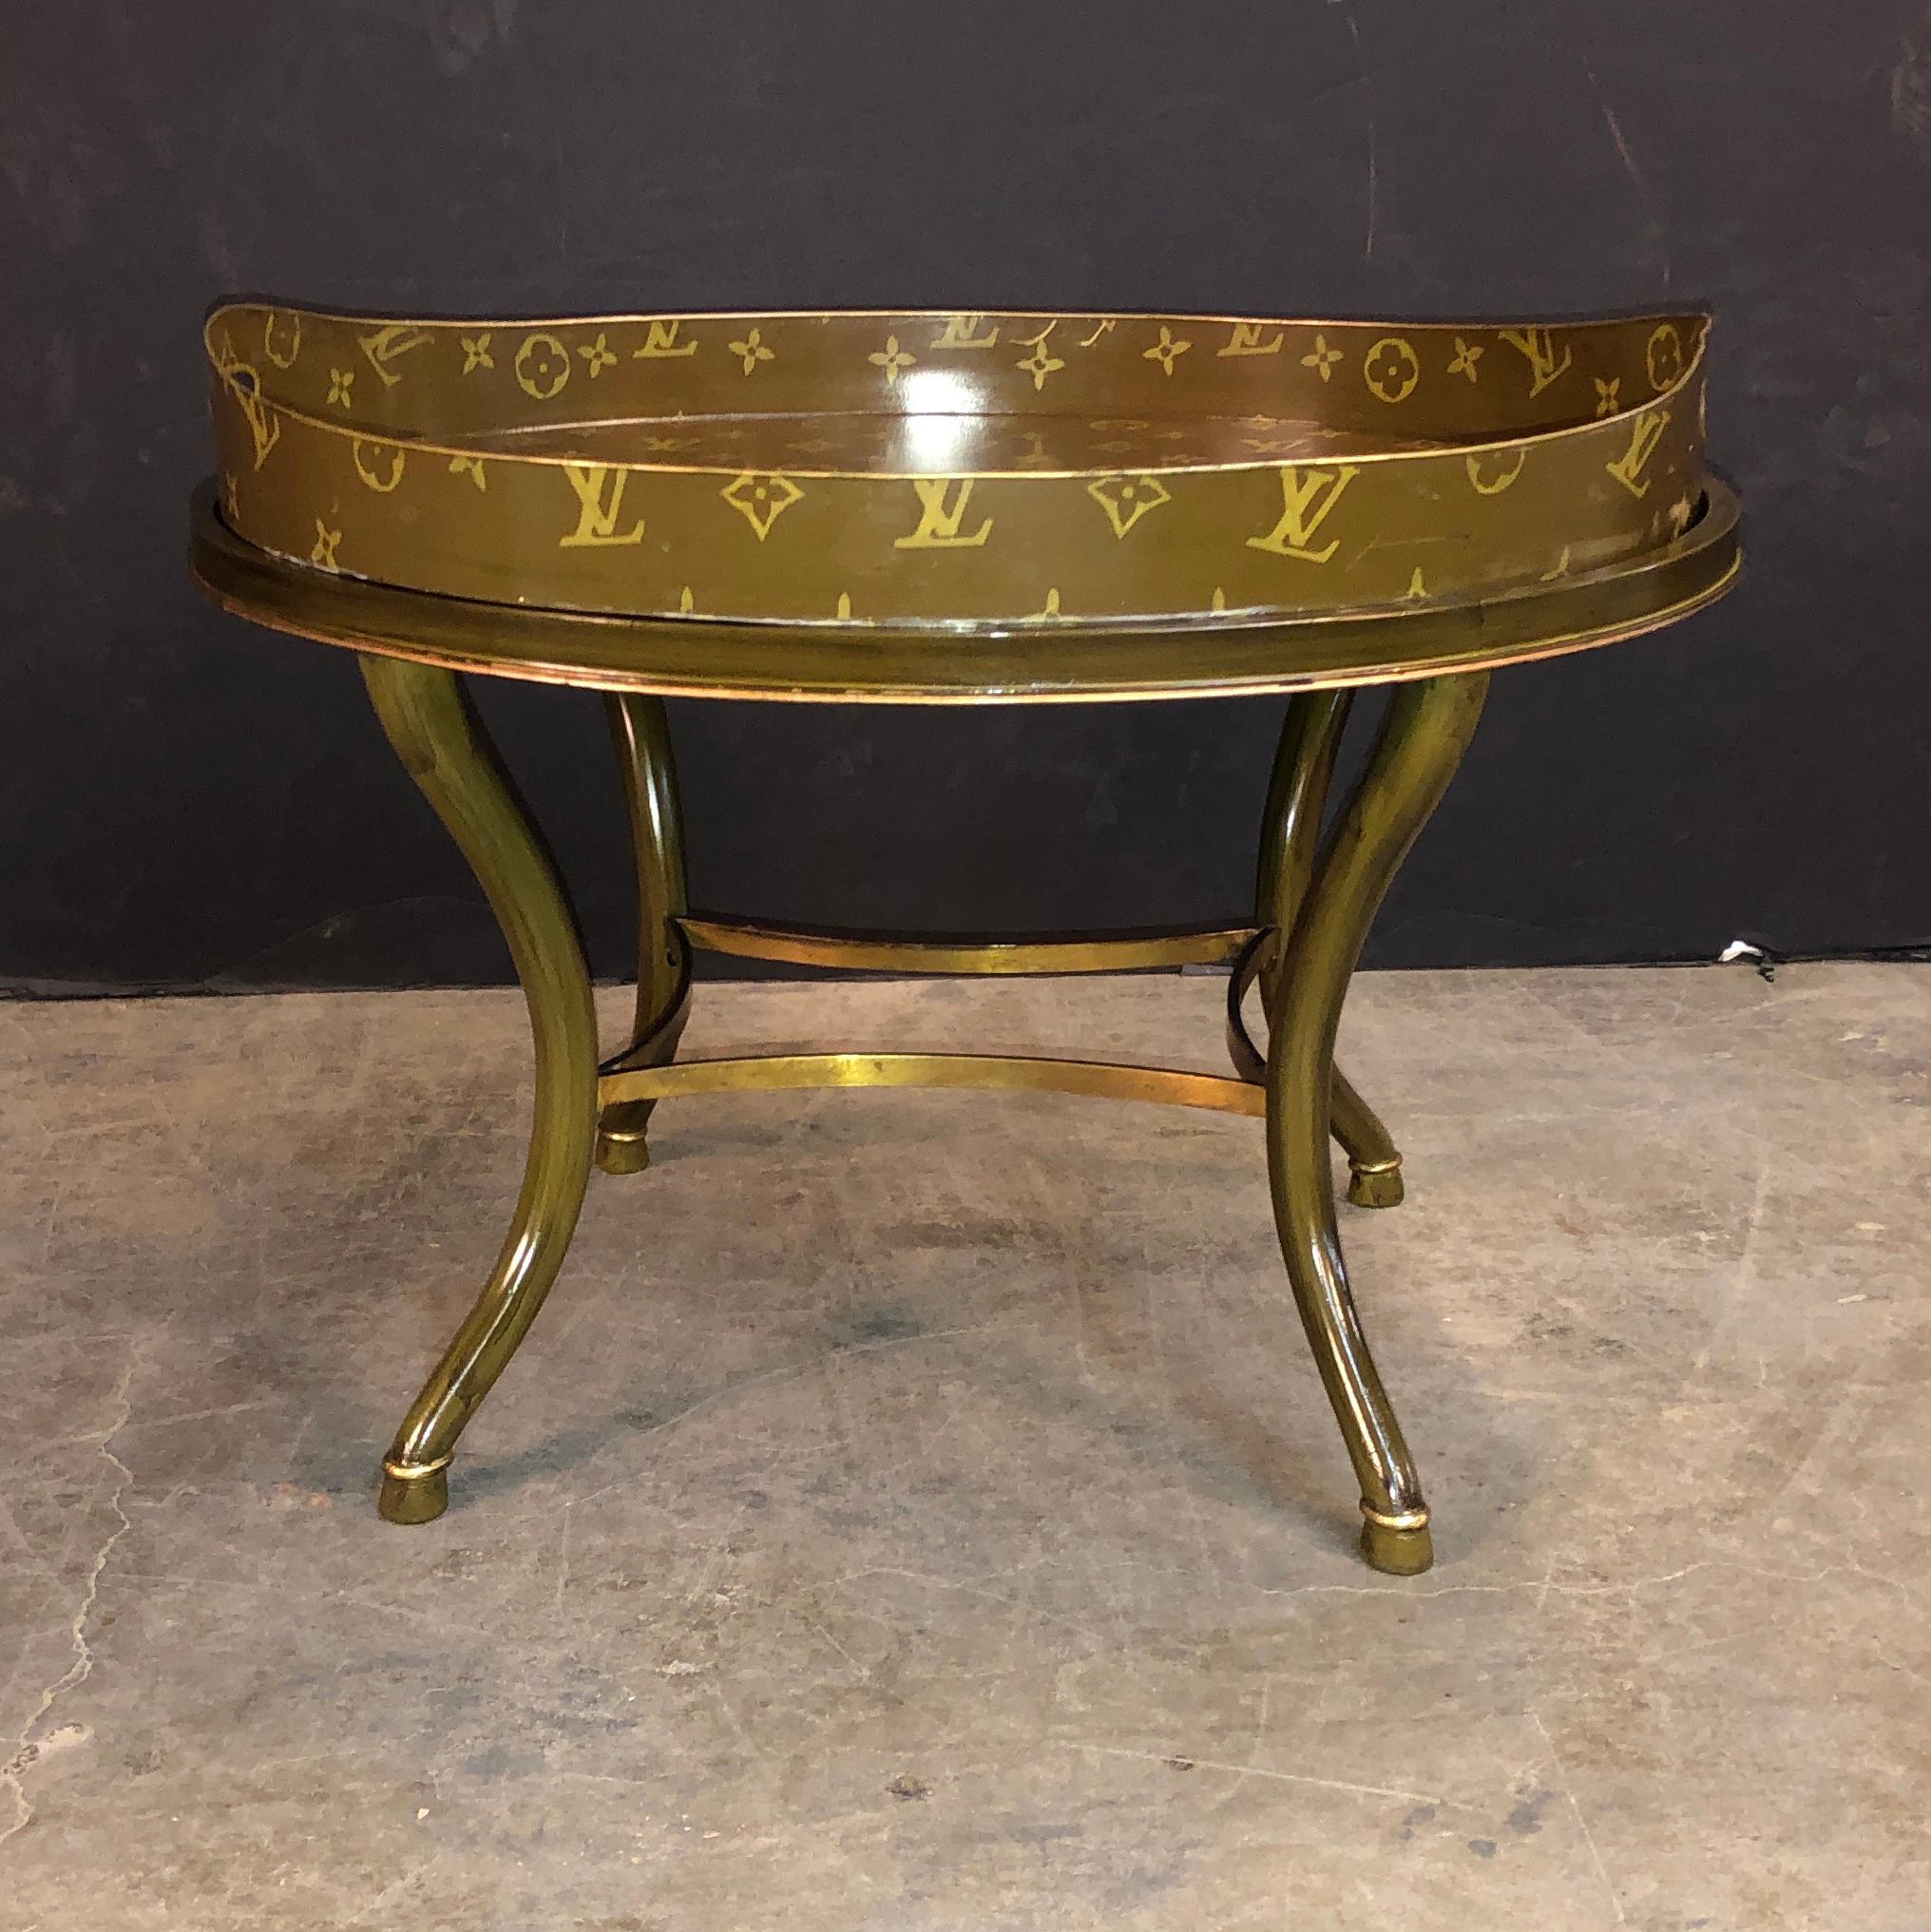 A wonderful antique European tray hand painted with the design motif and logo of Louis Vuitton. The matching base is also a later addition to the tray.